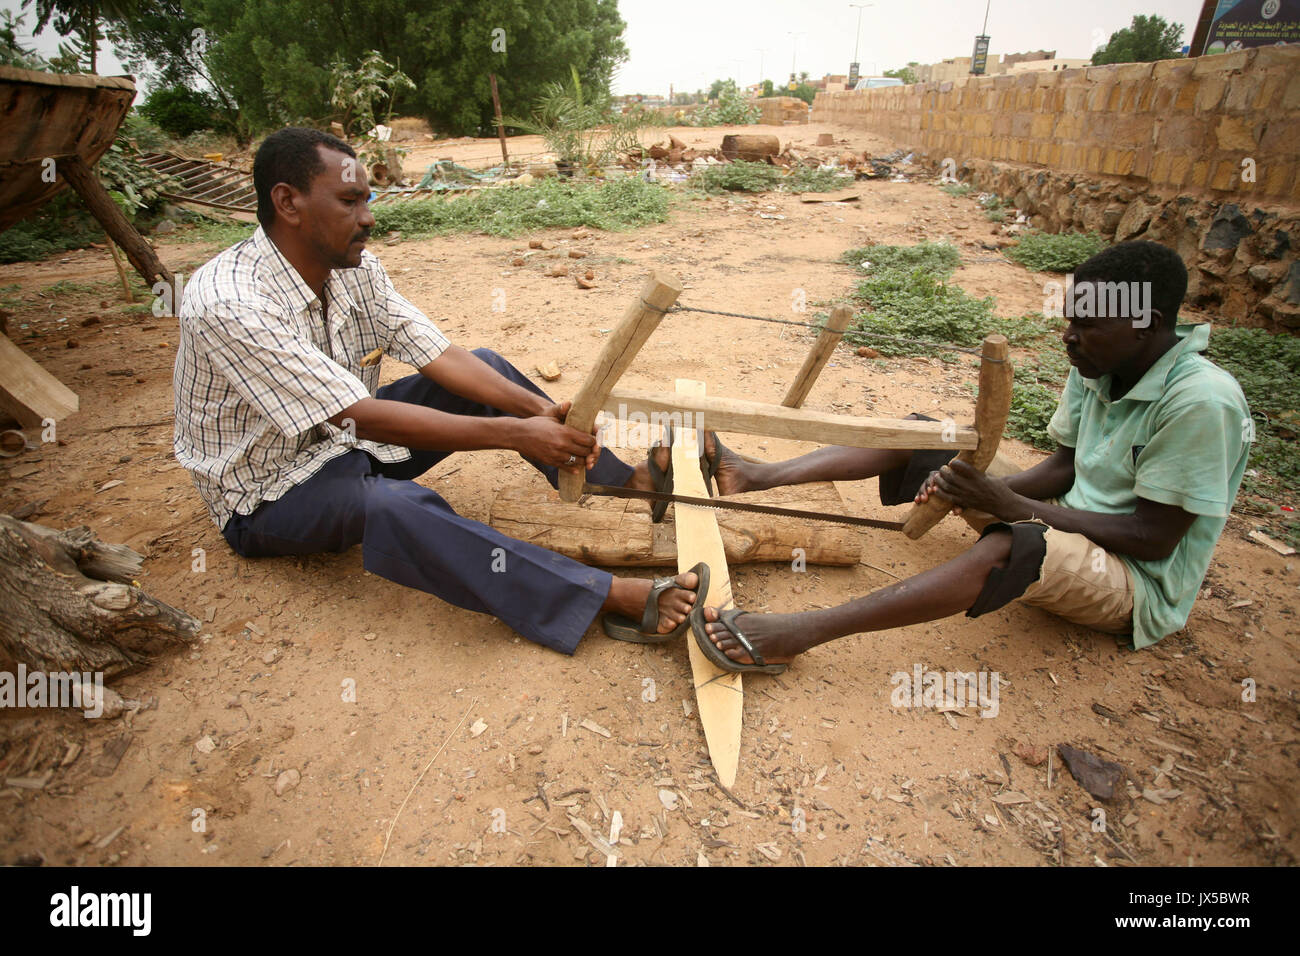 Khartoum, Sudan. 14th Aug, 2017. People make a wooden boat on the shore of the Nile at Abu Raouf area of Omdurman city, Sudan, on Aug. 14, 2017. Wooden boats in Sudan are still favored today as a means to cross the Nile River, particularly during seasonal flooding of the Nile, when levels of the river rise as a natural cycle since ancient times. The islanders and fishermen depend heavily on these traditional boats to transport their goods and personal belongings across the river, as the region is entering a season of Nile flooding. Credit: Mohamed Khidir/Xinhua/Alamy Live News Stock Photo